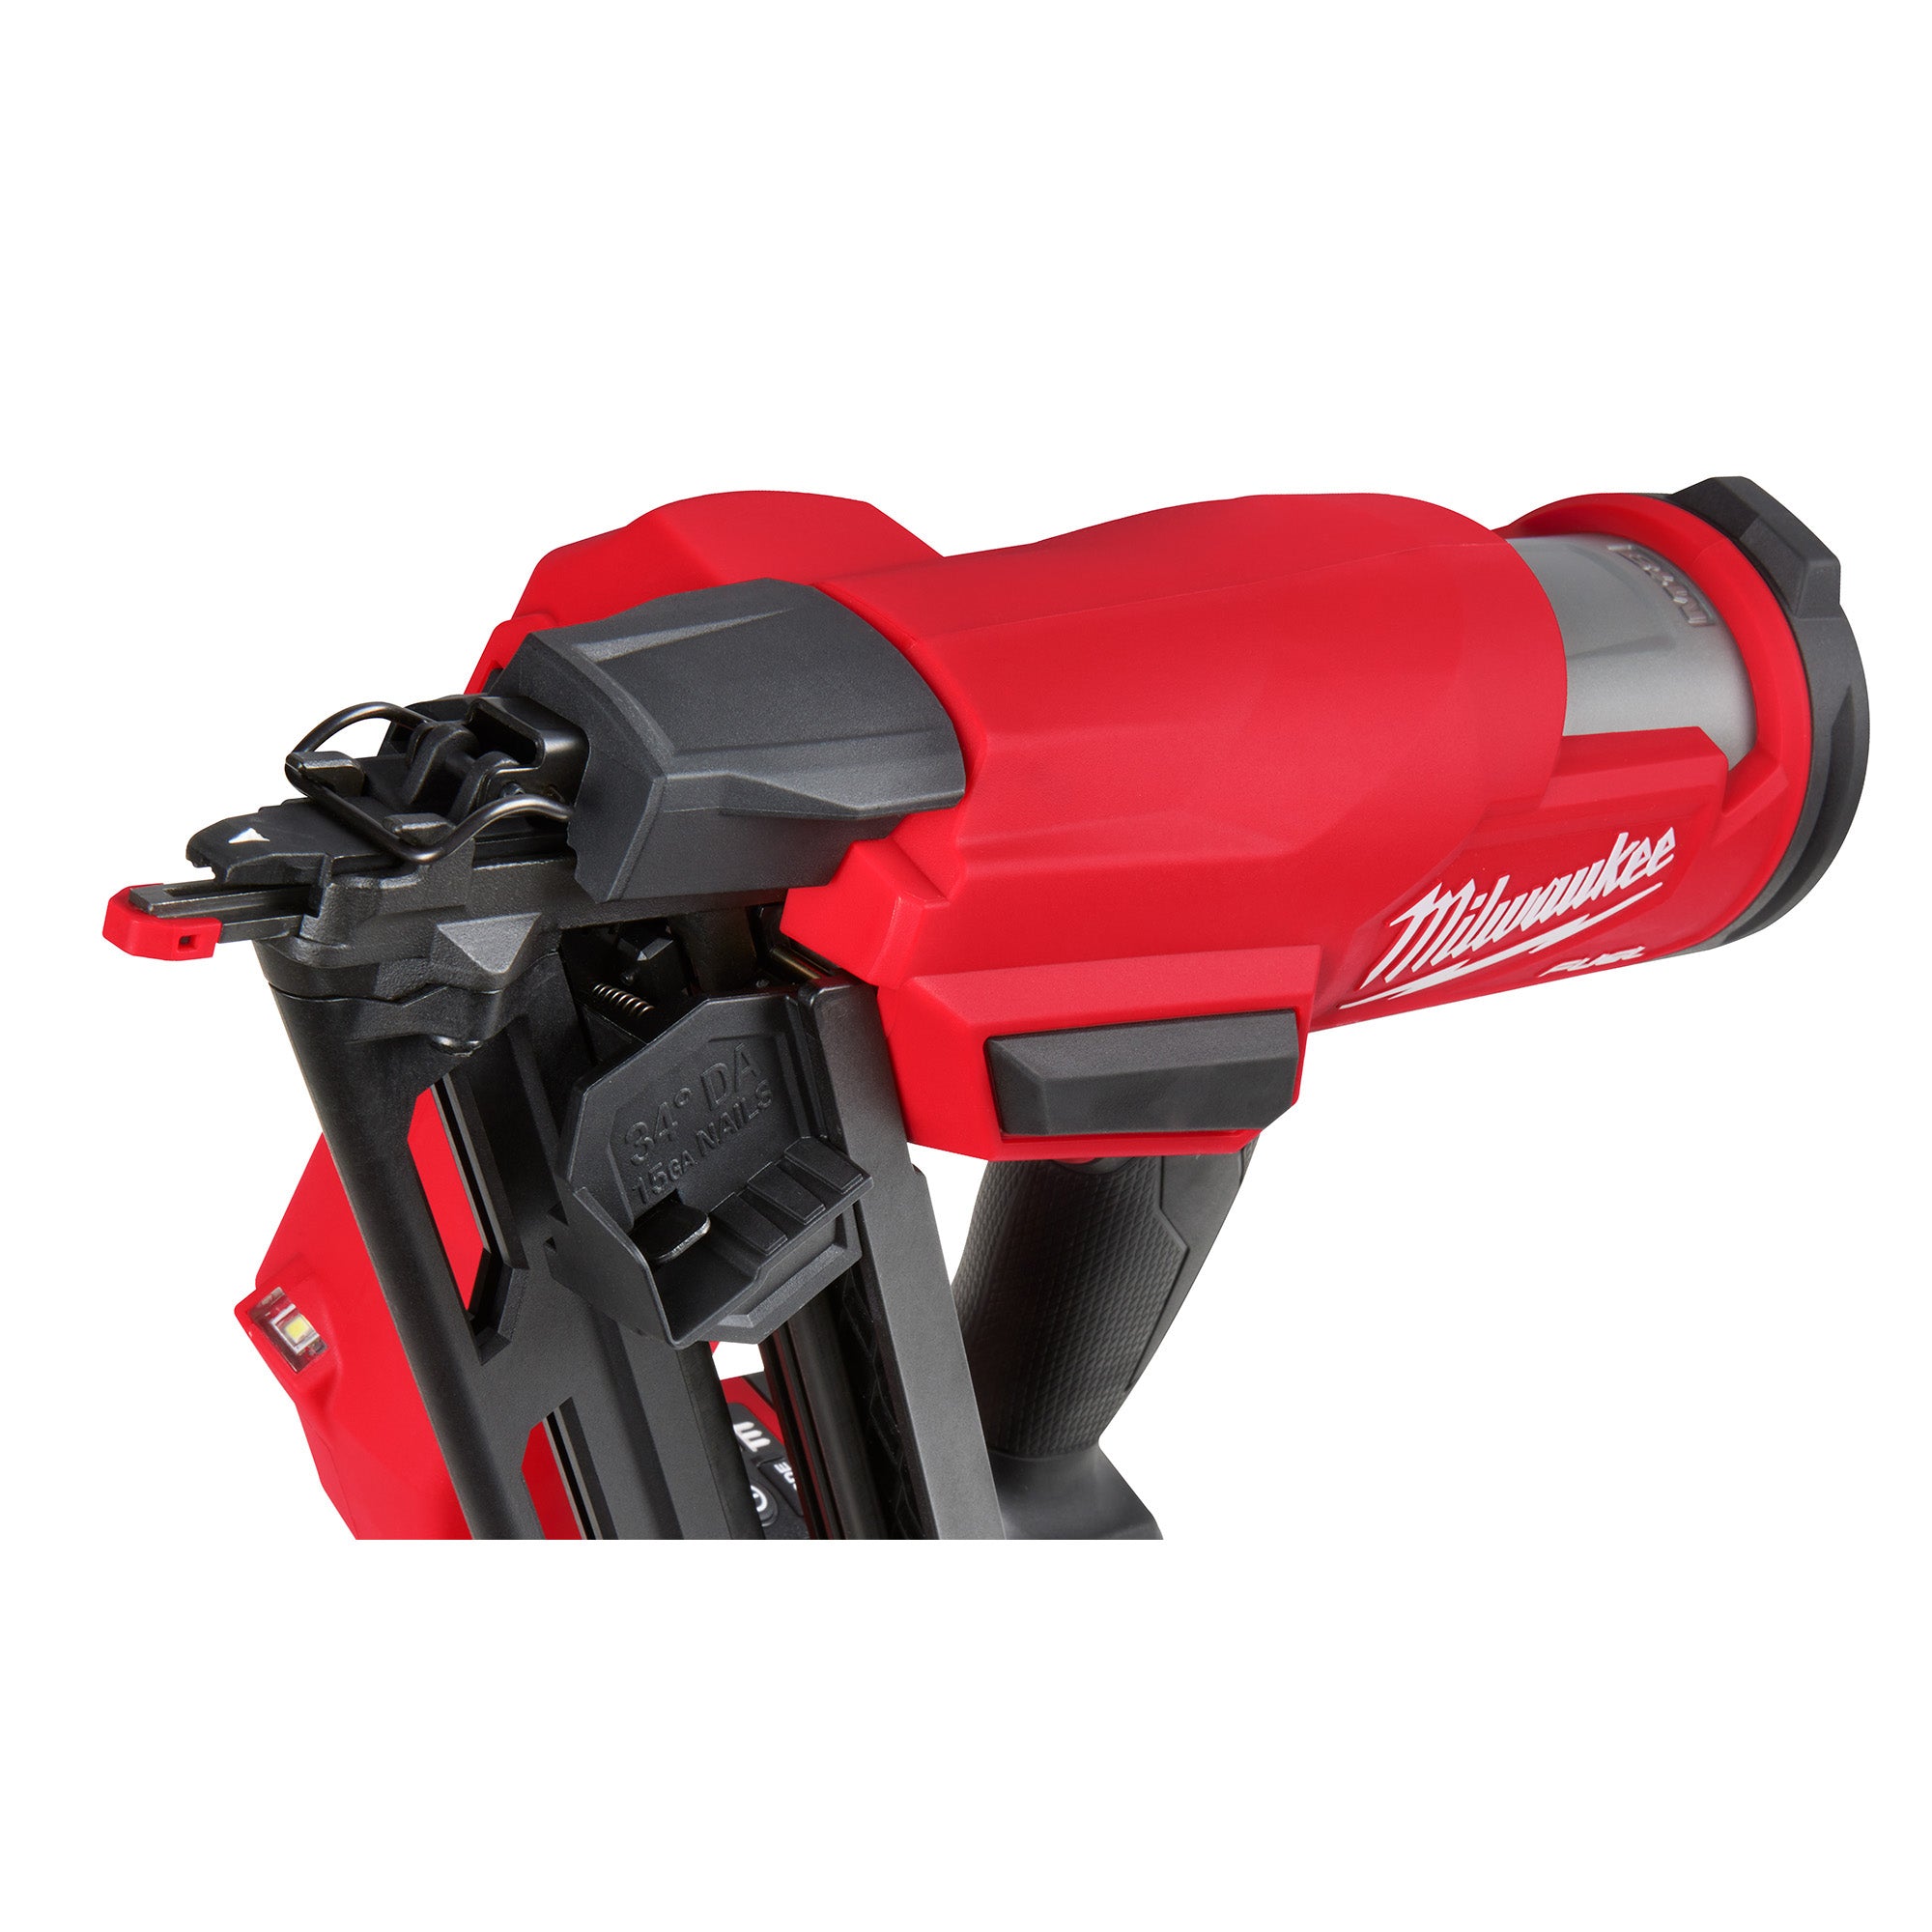 15-Gauge 2-1/2" Cordless M18 FUEL Angled Finish Nailer (Tool Only)